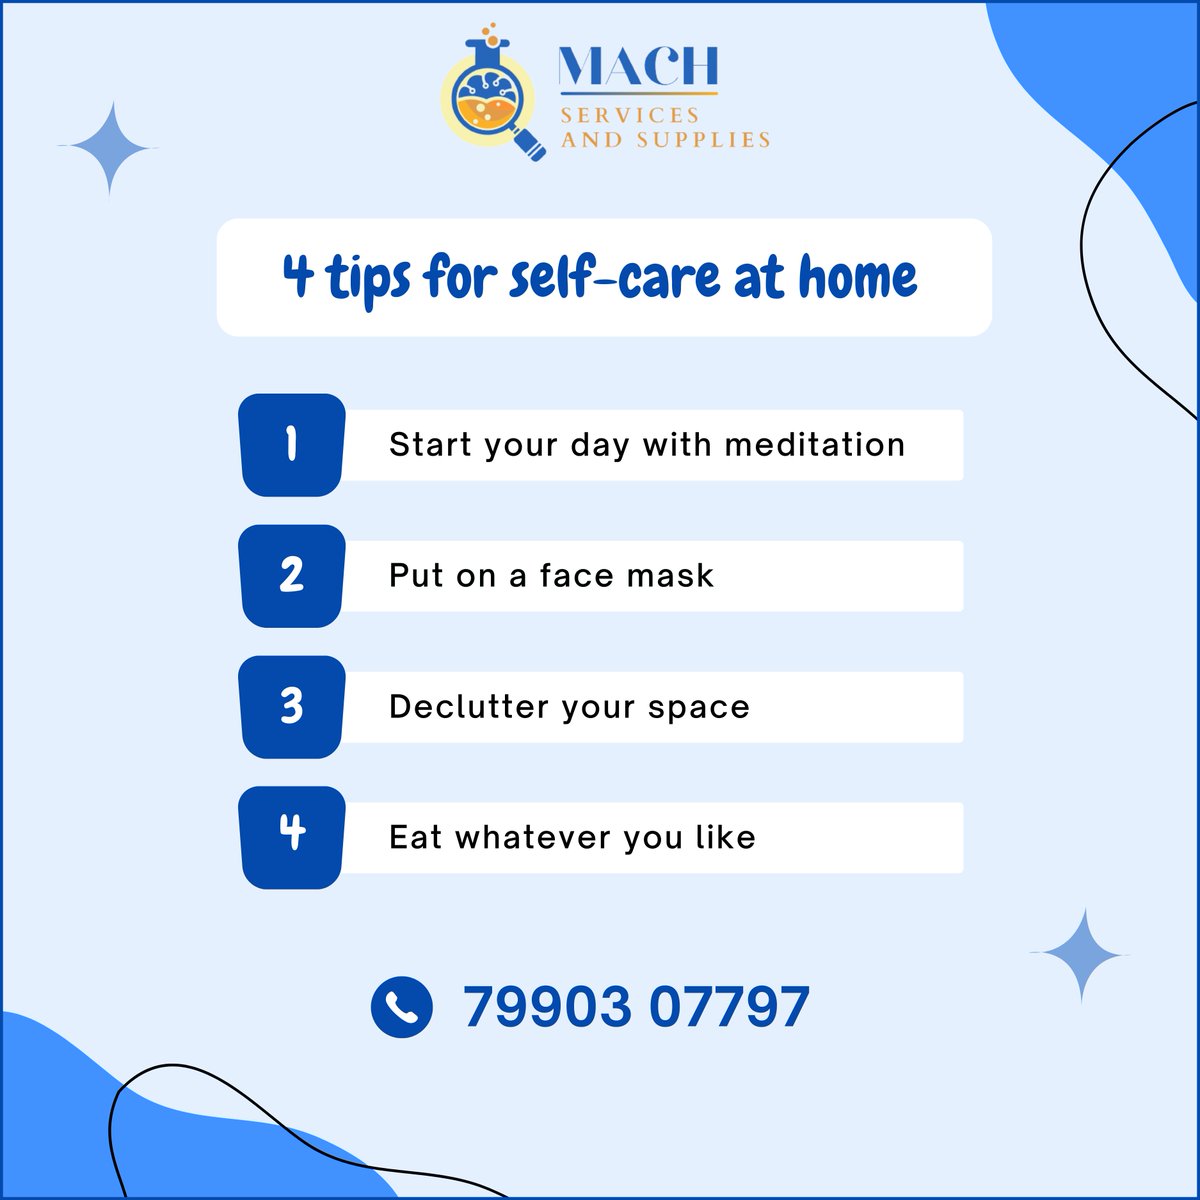 4 tips for self-care at home itself.
.
.
#delivery #machservicesandsupplies #machservices #deliveryservice #style #love #instagood #like #photography #motivation #motivationalquotes #inspiration #surat #suratcity #suratfood #suratphotoclub #sunofcitysurat #sürat #wearehiring